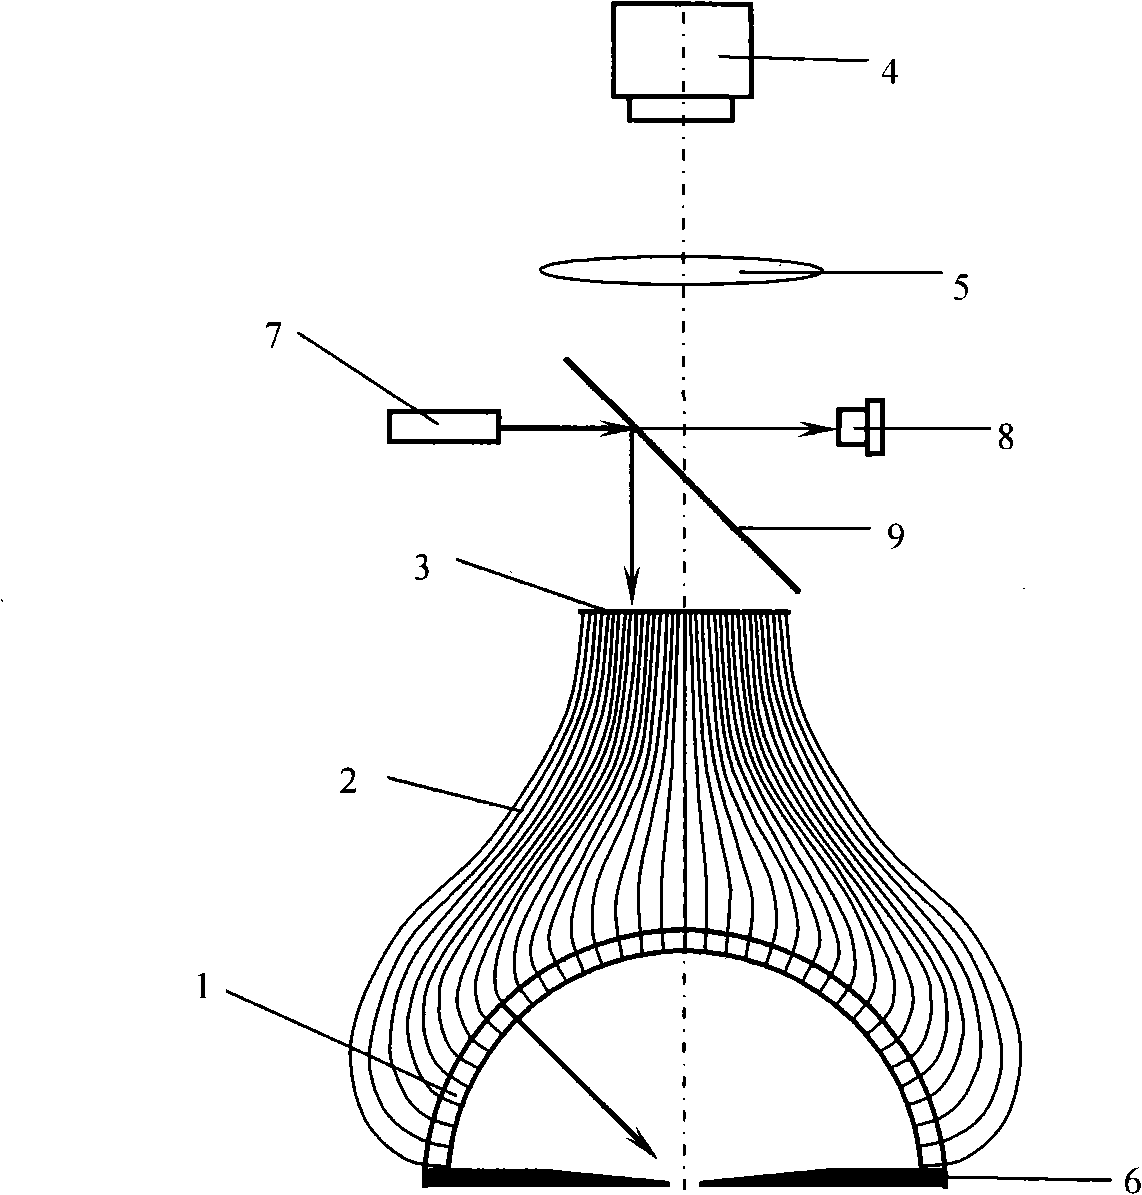 Device for measuring radiation and scattered light field three dimensional distribution